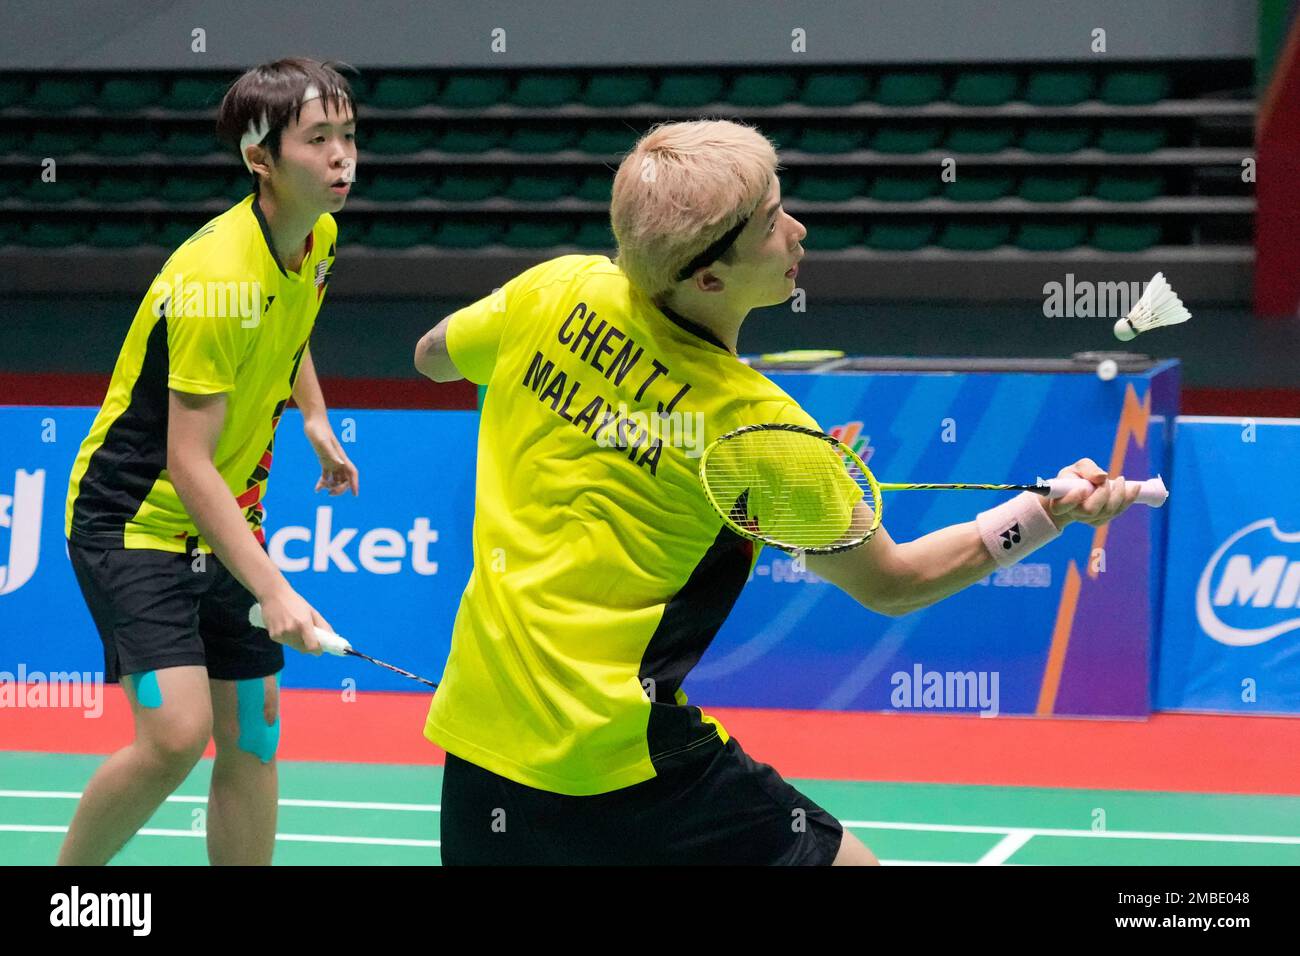 Malaysias Chen Tang Jie, right, and Peck Yen Wei compete against their compatriots Hoo Pang Ron and Cheah Yee See during their mixed doubles badminton final match at the 31st Southeast Asian